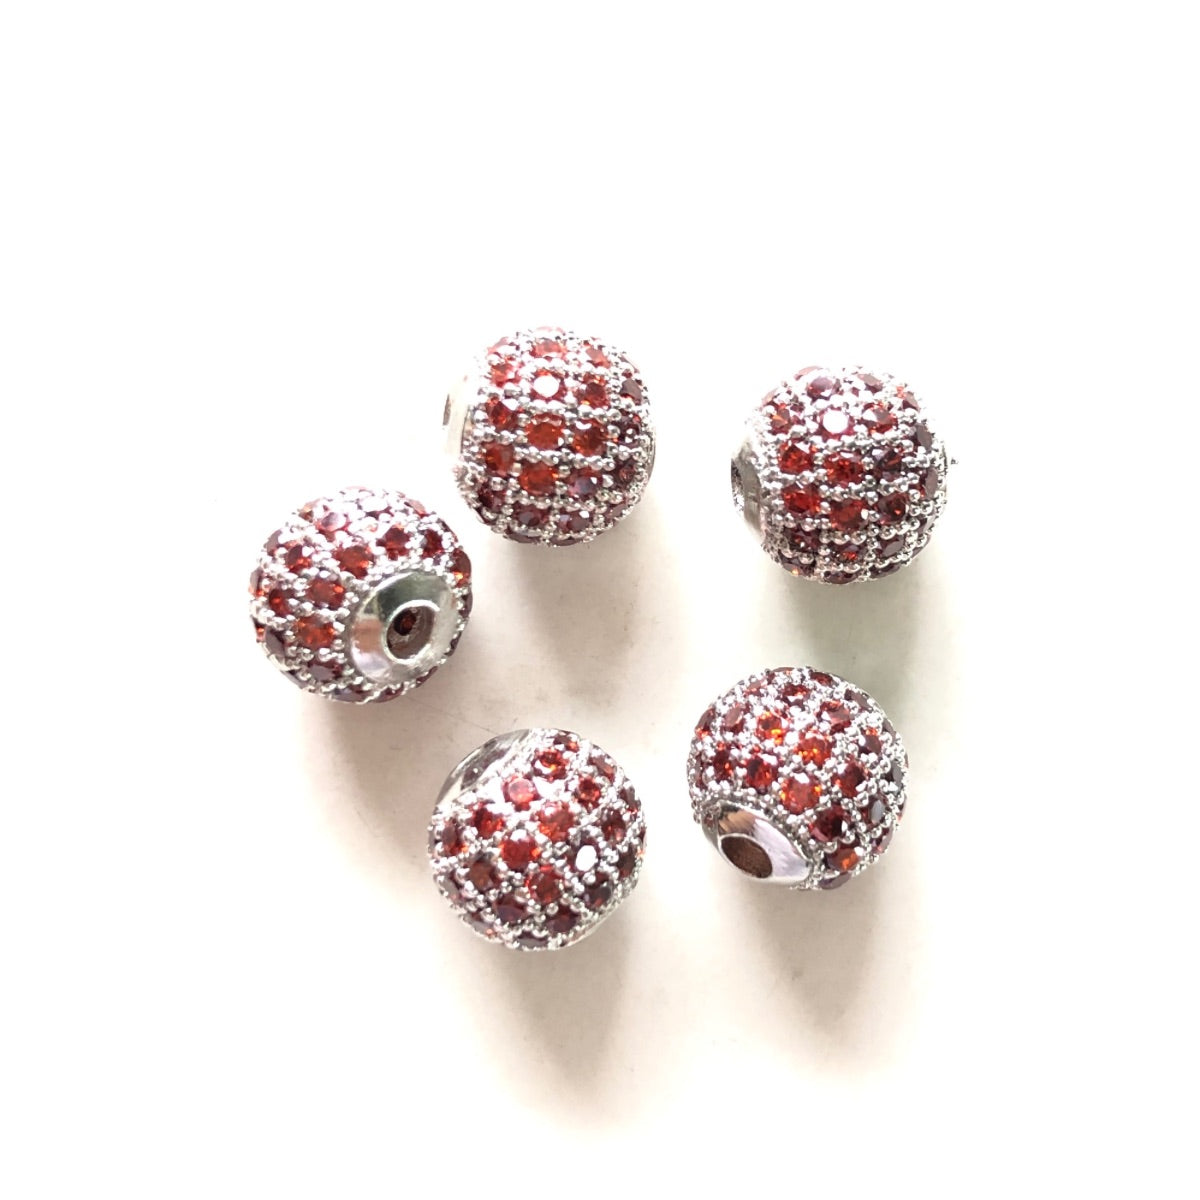 10pcs/lot 6mm, 8mm Colorful CZ Paved Ball Spacers Silver Reddish Orange CZ Paved Spacers 6mm Beads 8mm Beads Ball Beads Colorful Zirconia New Spacers Arrivals Charms Beads Beyond